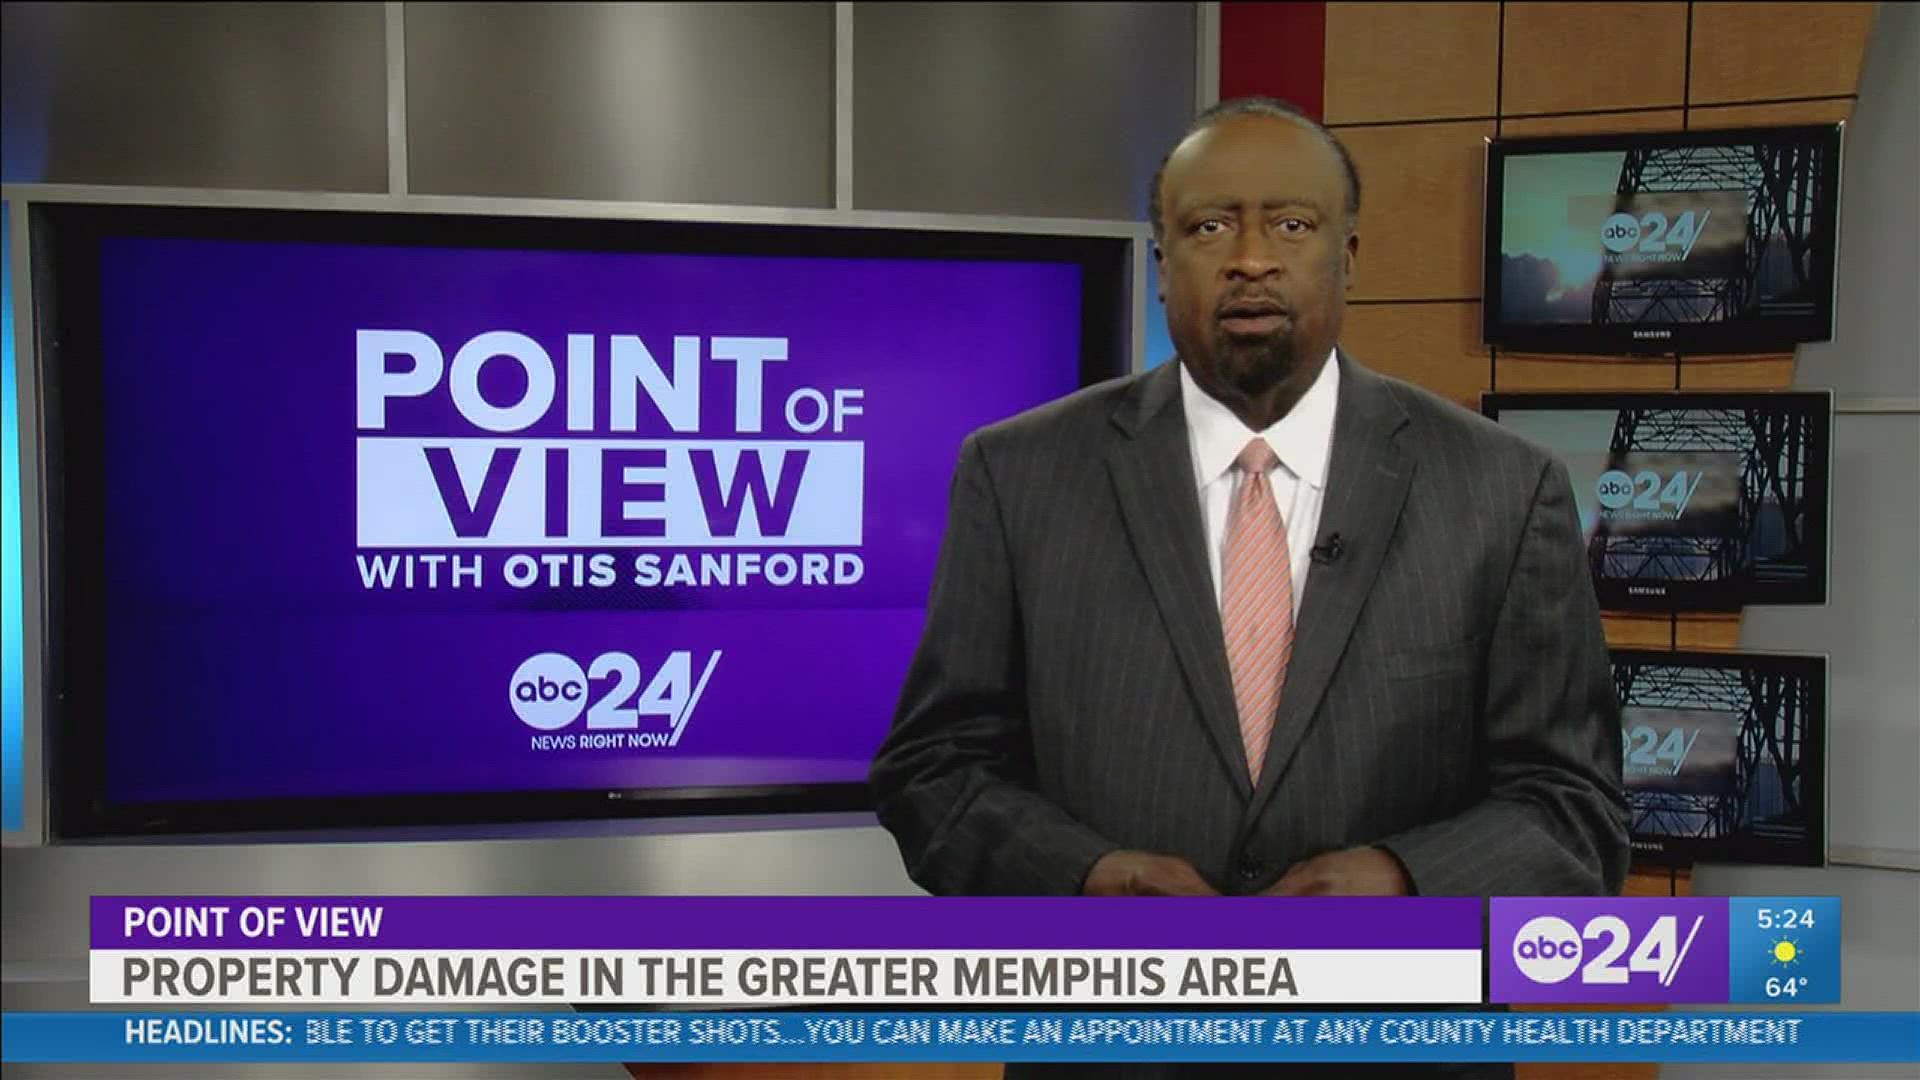 ABC 24 political analyst and commentator Otis Sanford shared his point of view on vandalism at a Memphis memorial.